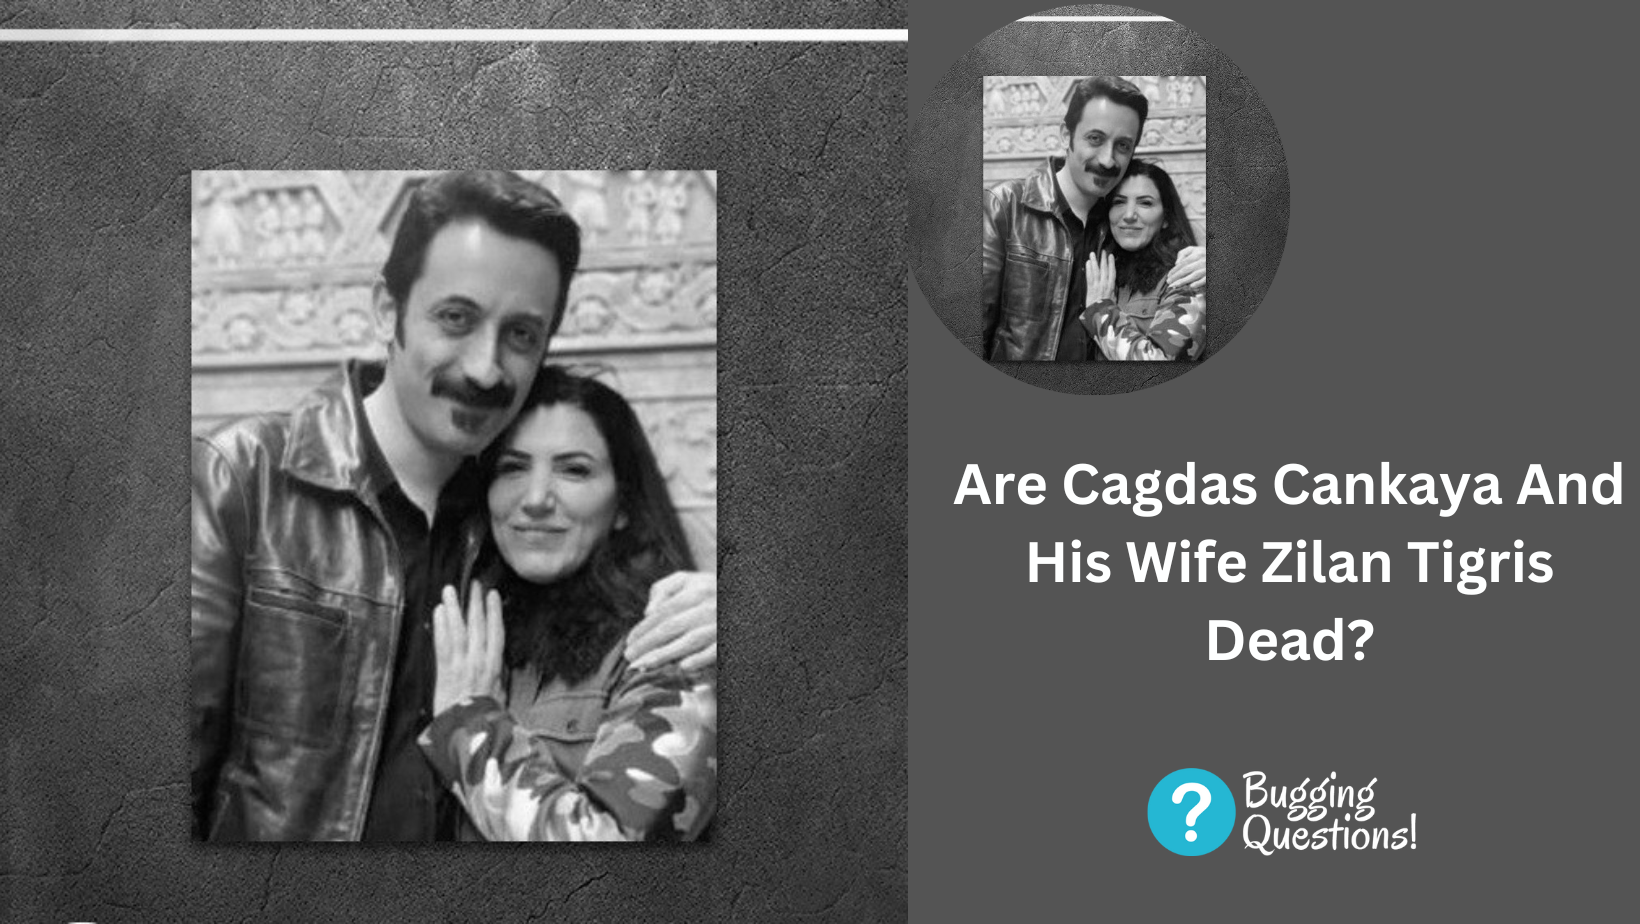 Are Cagdas Cankaya And His Wife Zilan Tigris Dead?